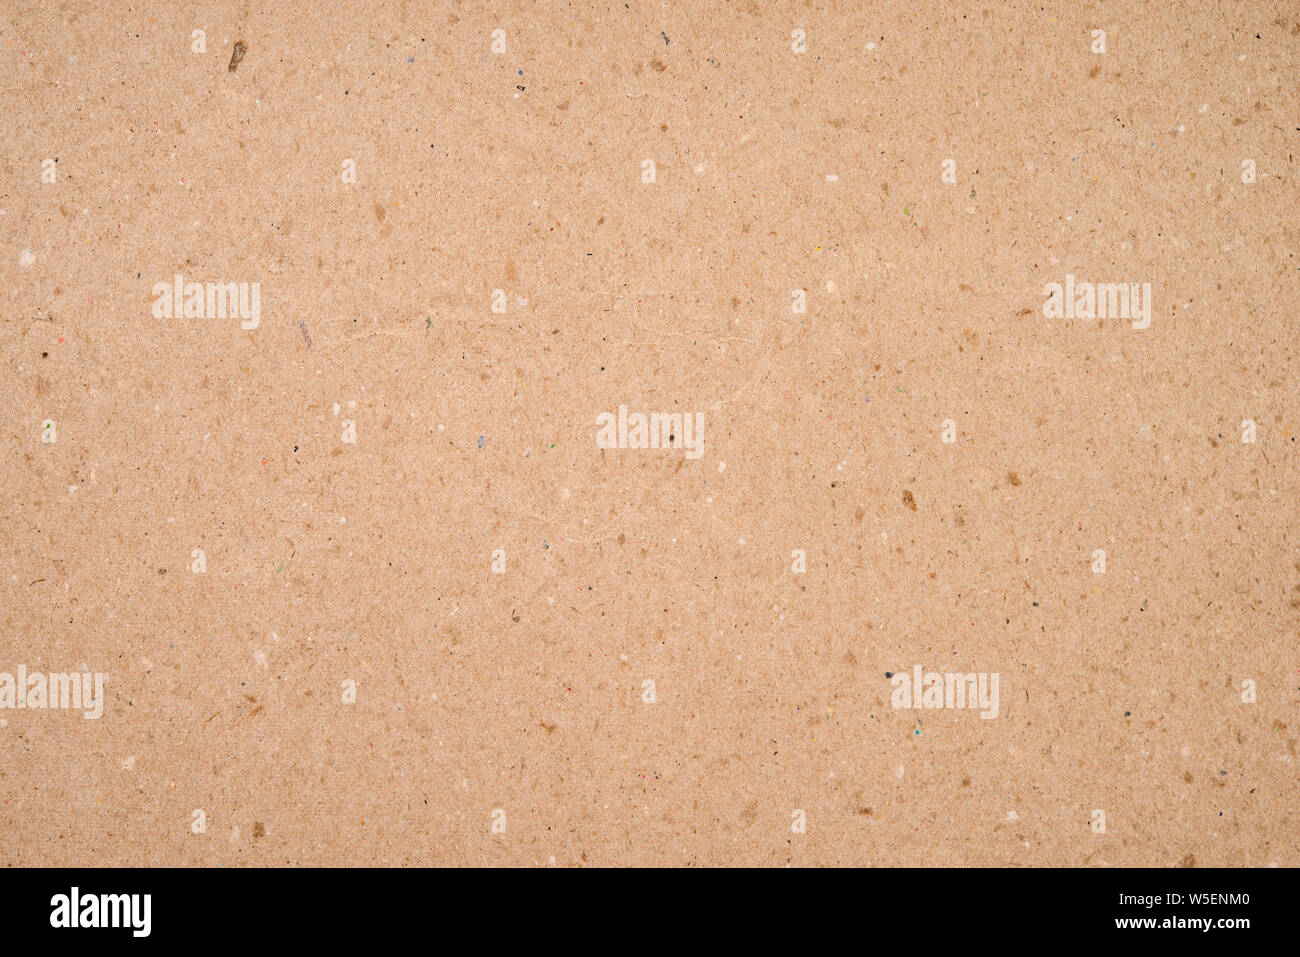 brown paper texture background Stock Photo